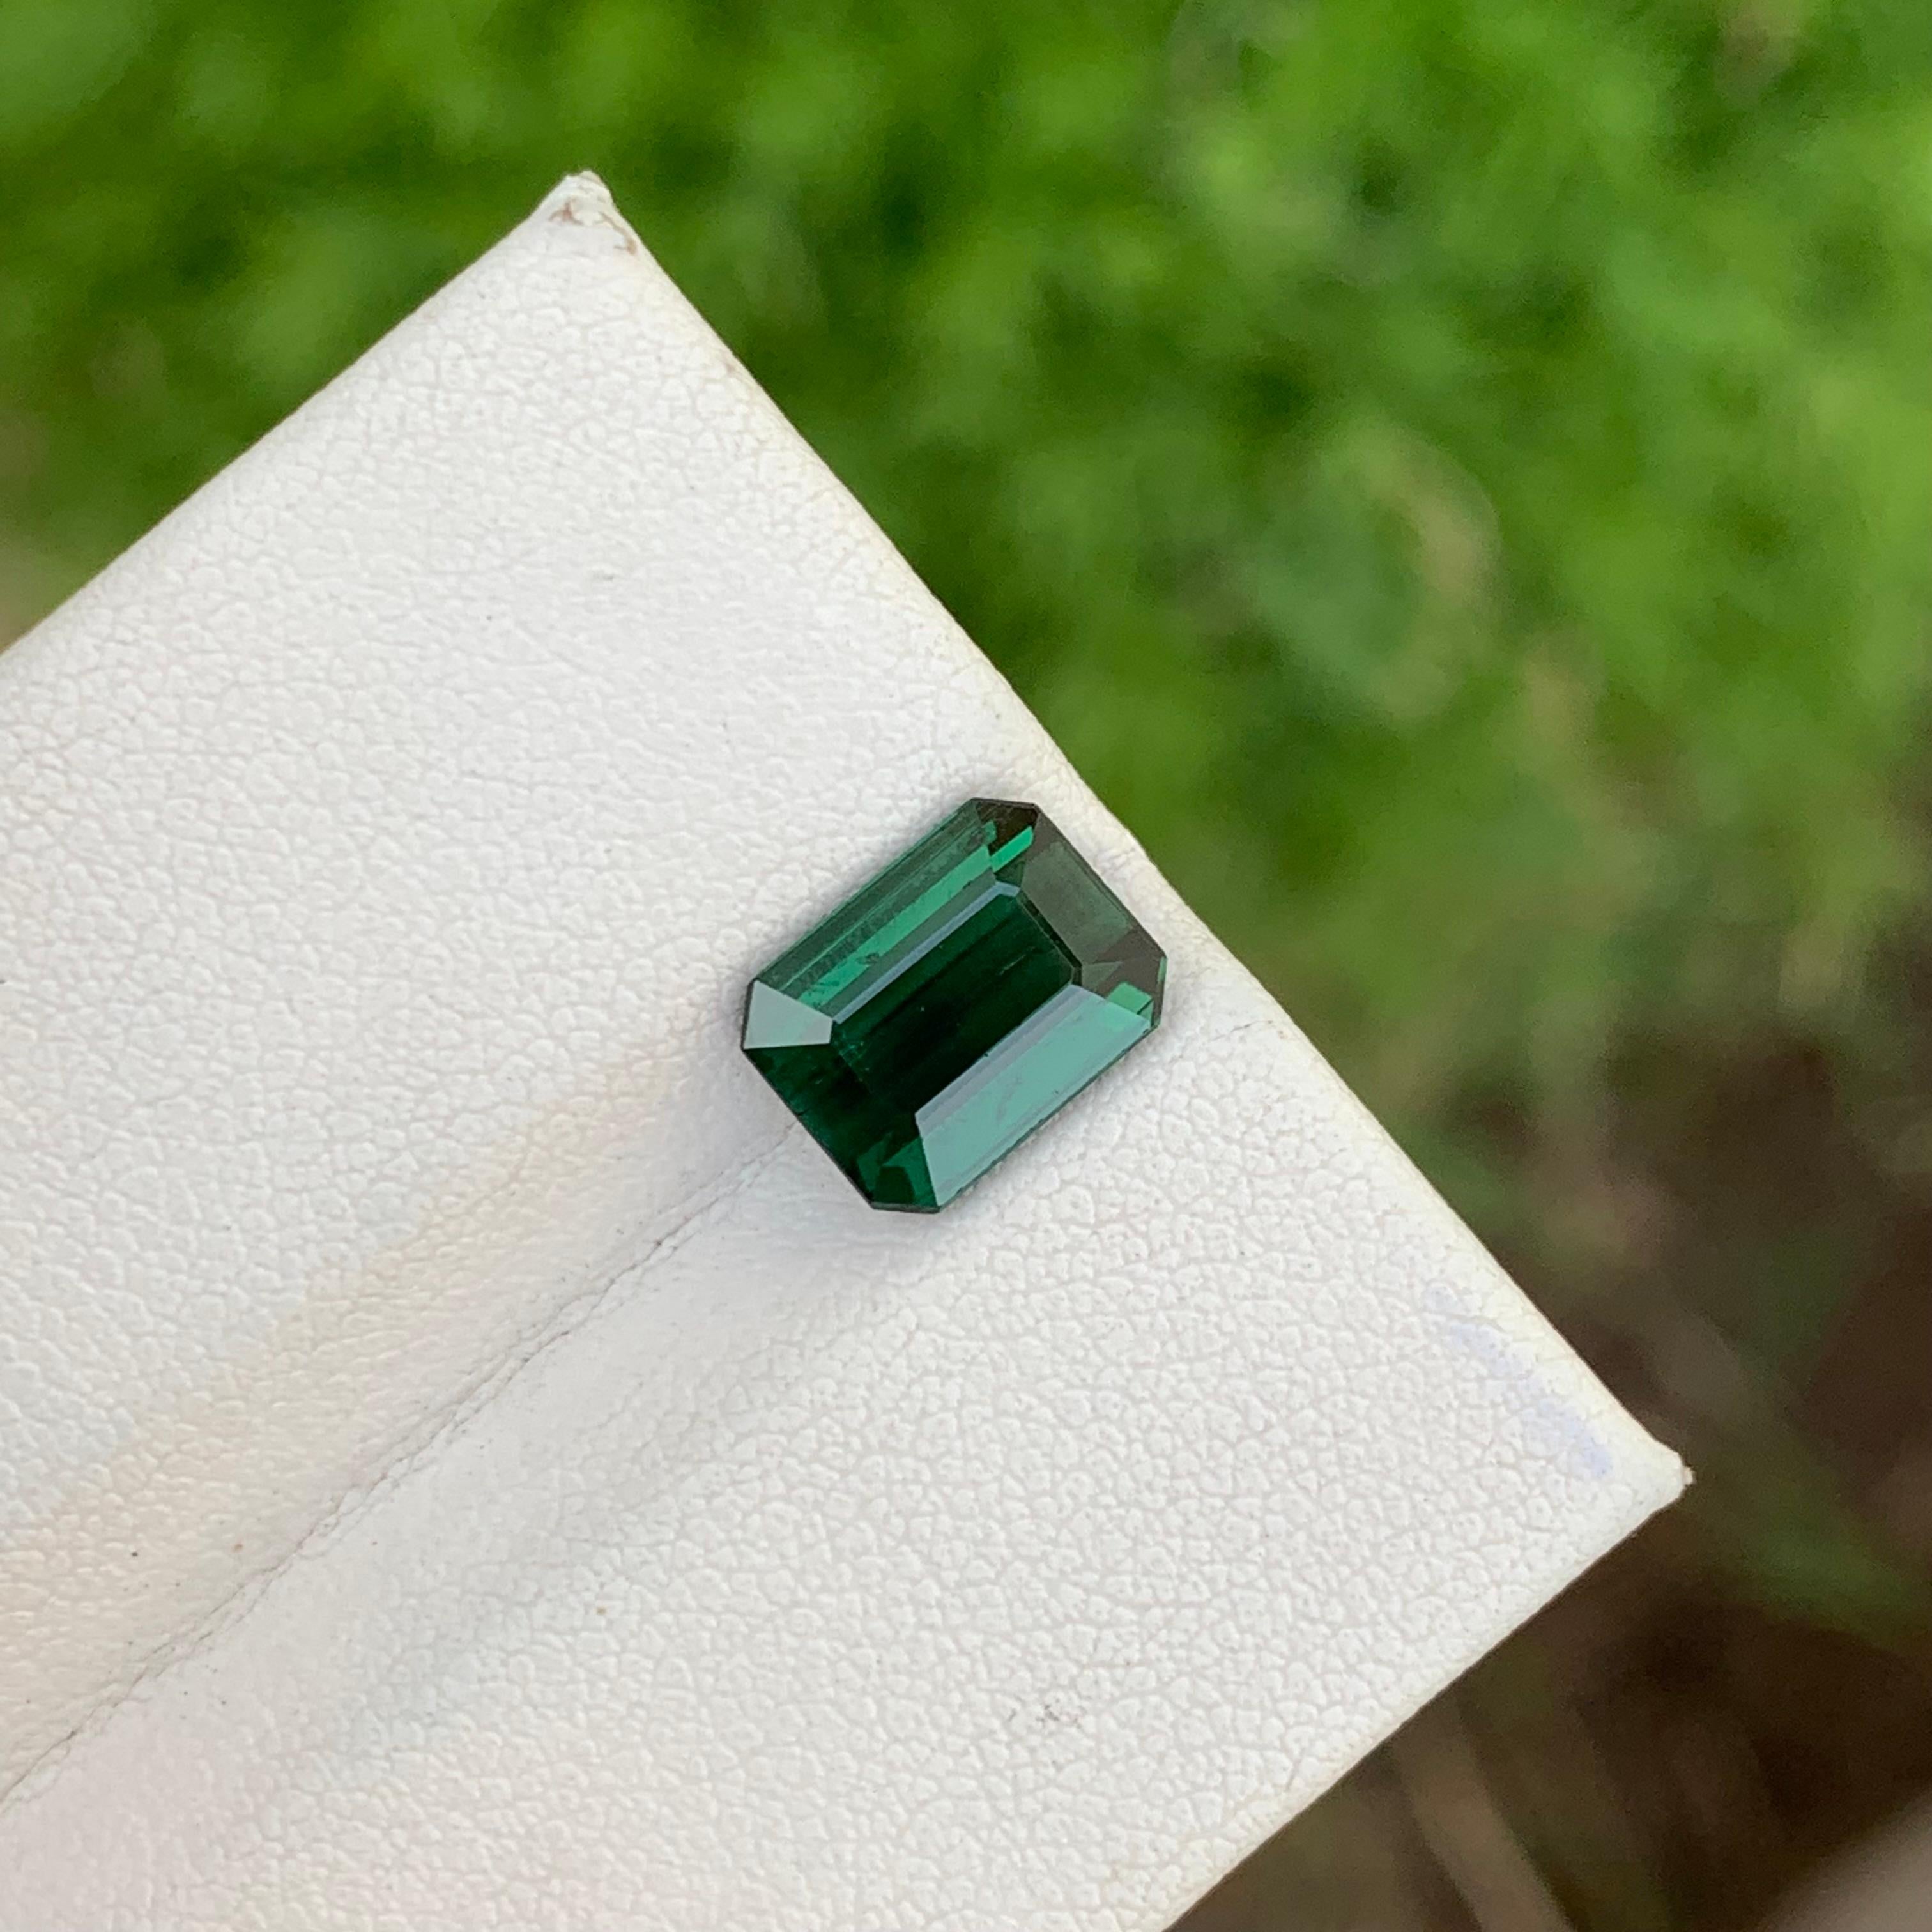 Loose Tourmaline 
Weight: 2.80 Carats 
Dimension: 9.5x7.3x4.4 Mm
Origin; Africa
Shape: Emerald 
Color: Green
Treatment: Non
Certificate: On Demand 
Tourmaline is a diverse and fascinating gemstone known for its wide range of colors and unique